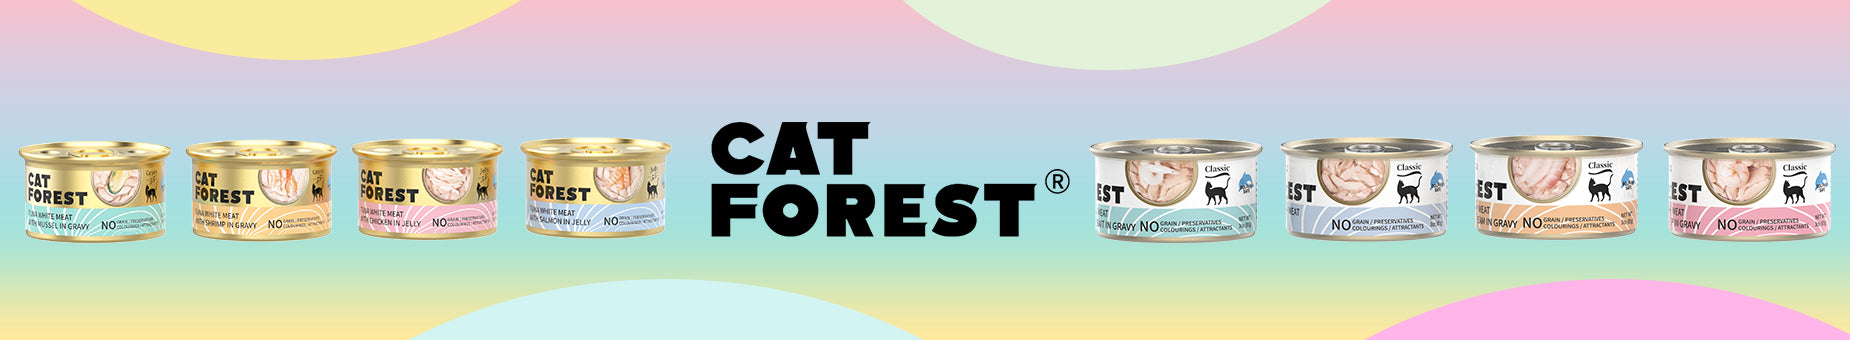 Cat Forest Banner image